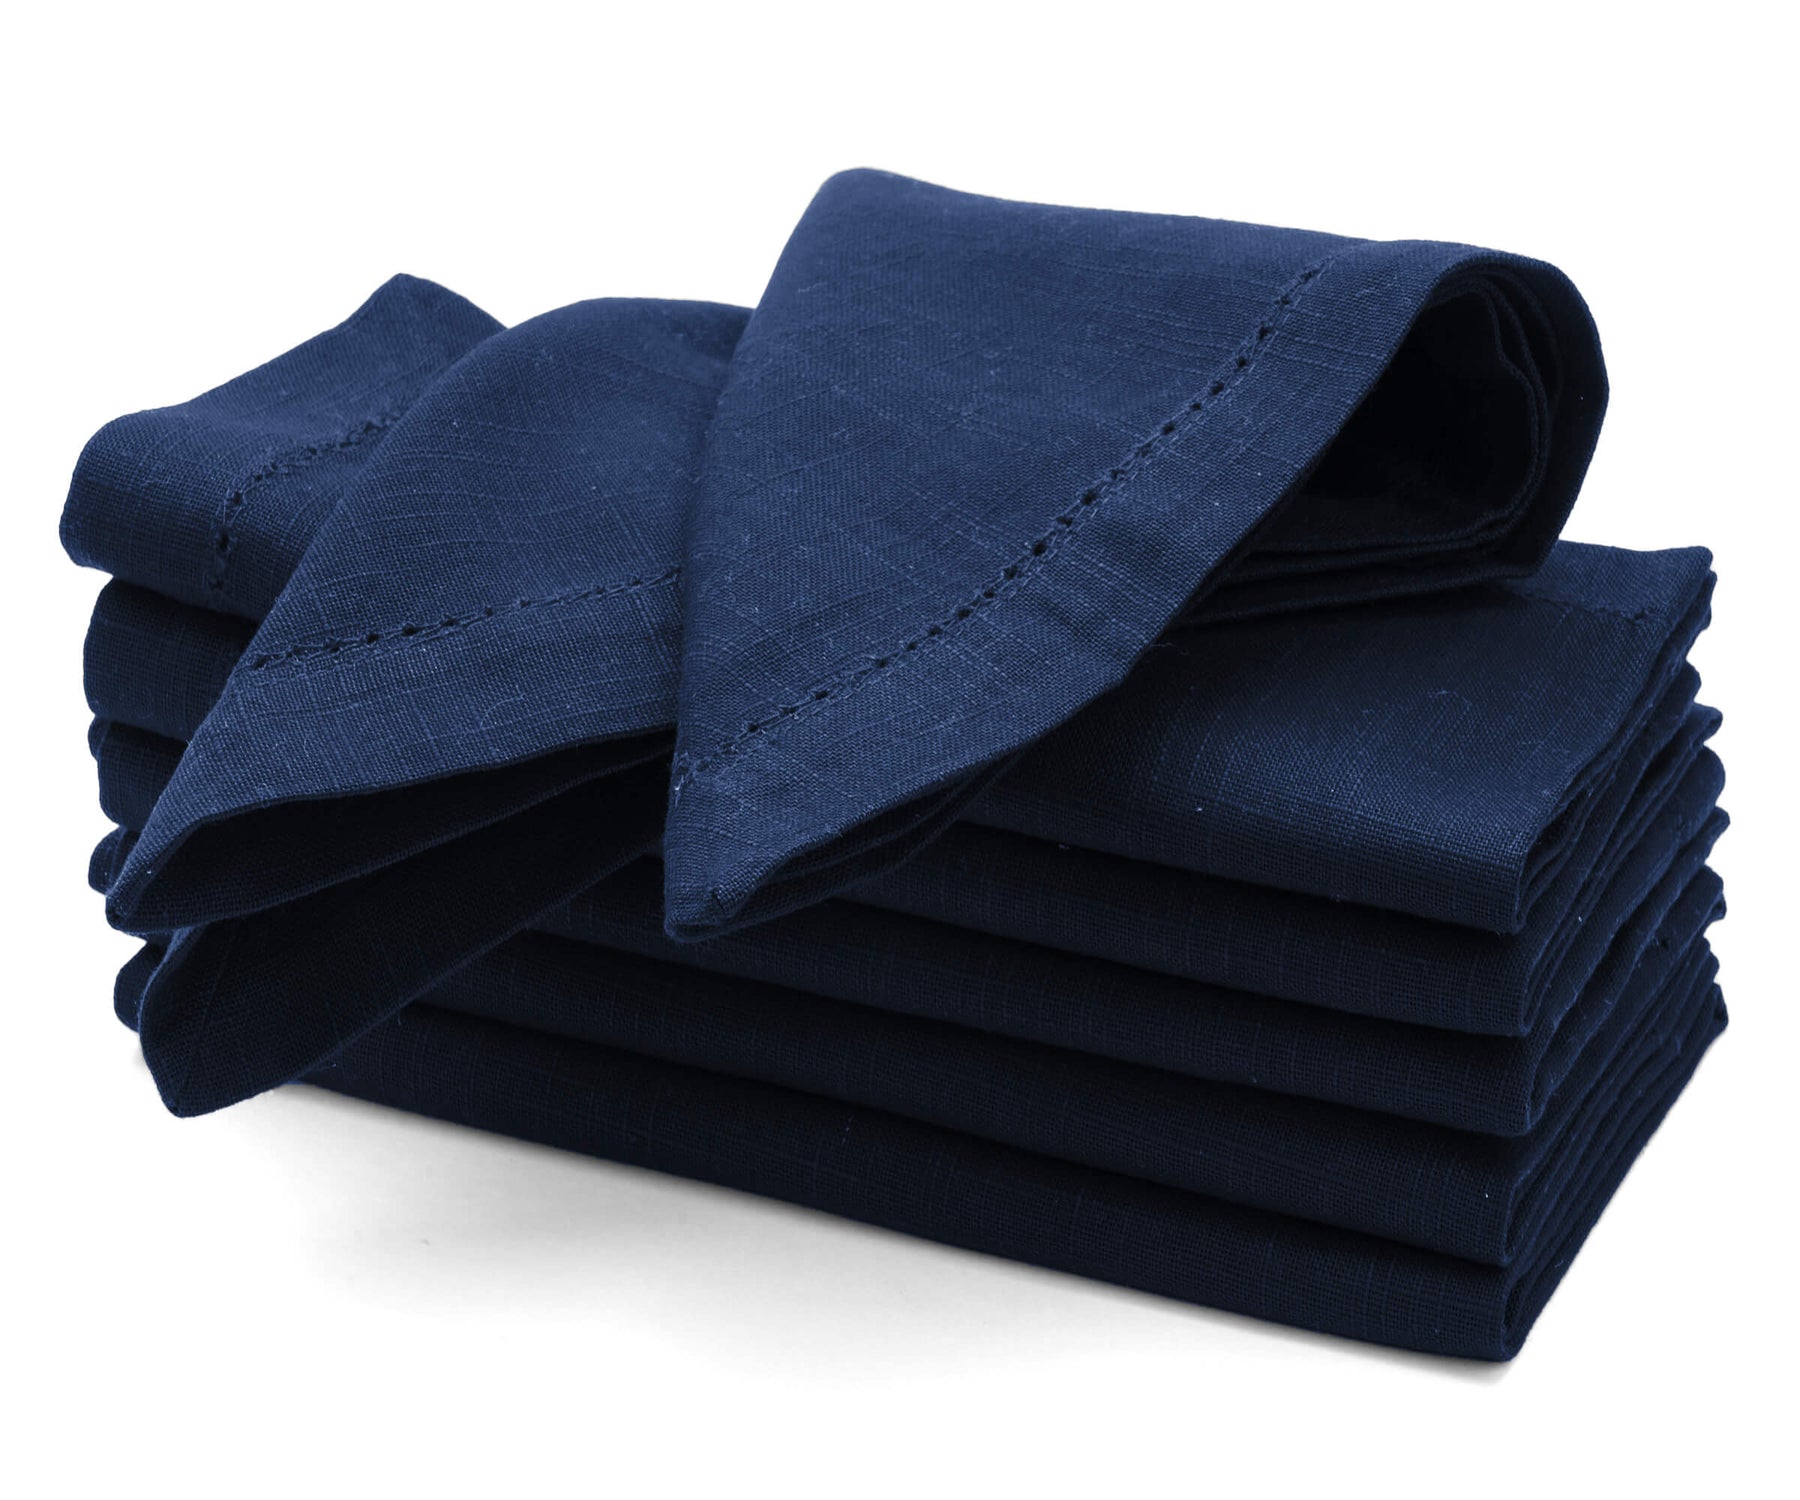  easter cloth napkins navy blue cloth tea party napkins of size 18x18", set of 6 dinner napkins are with borders arranged one above another.